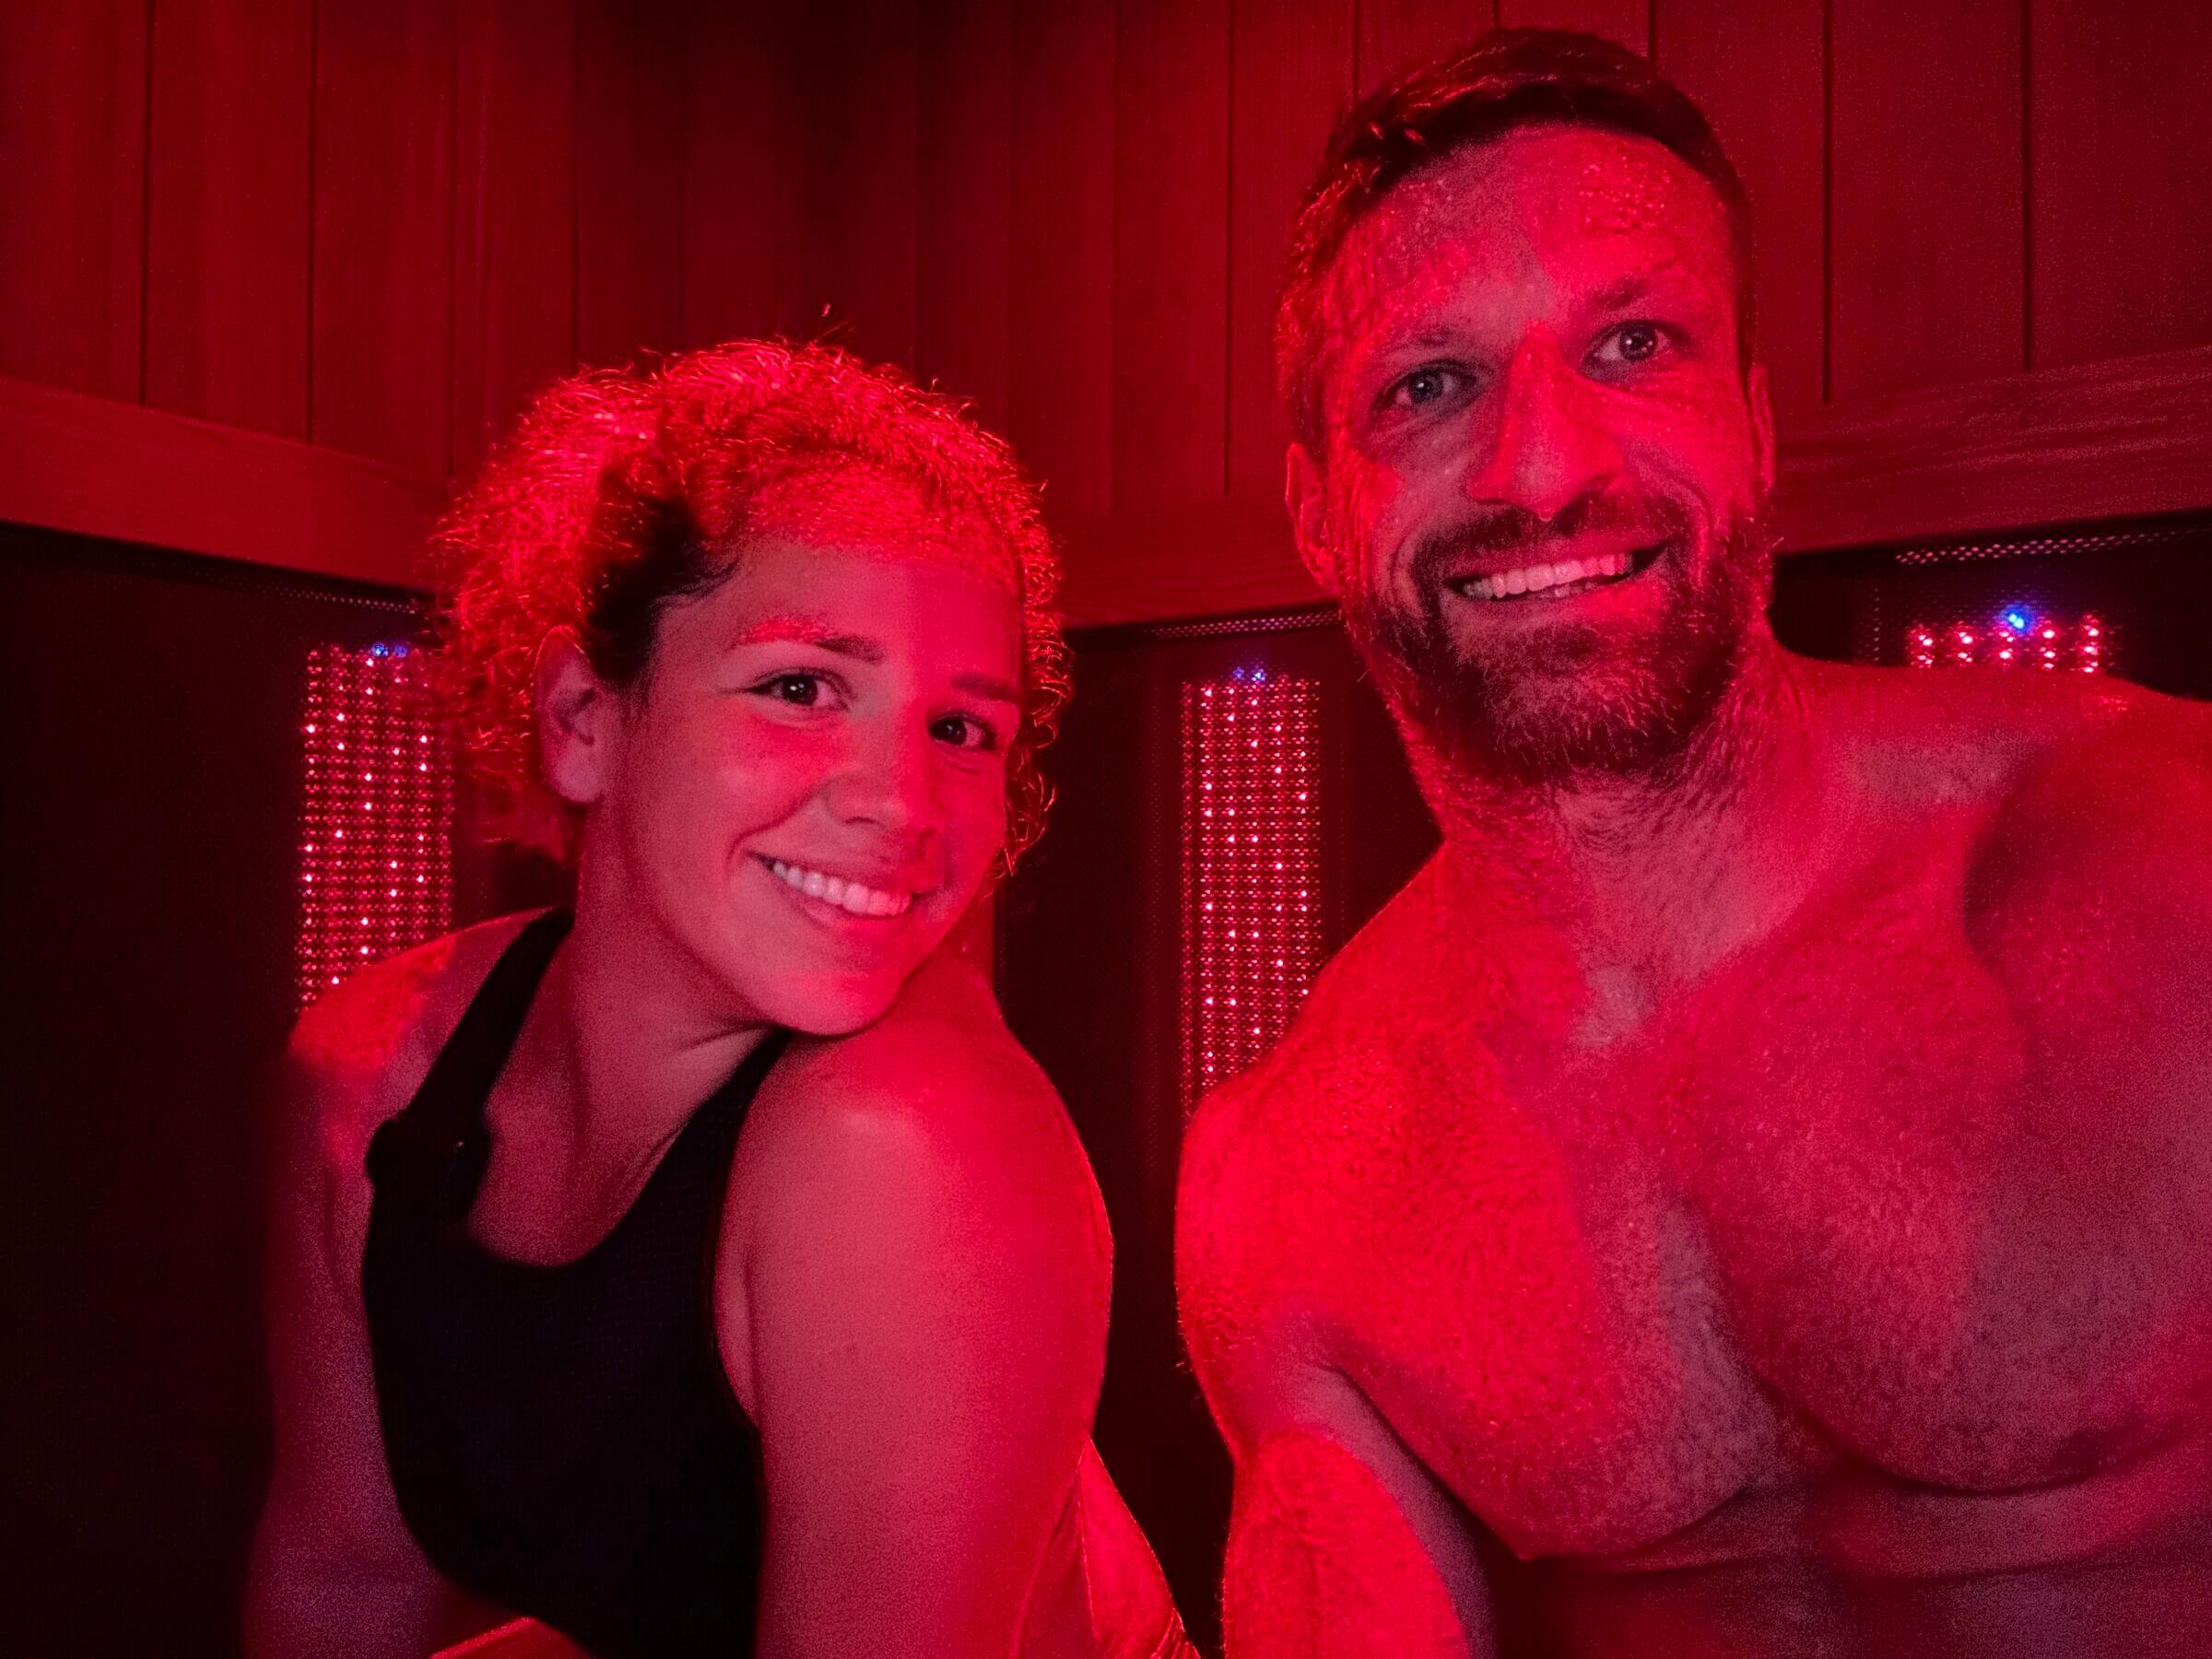 My wife and I love the combination of red and infrared light to recover from tough workouts.